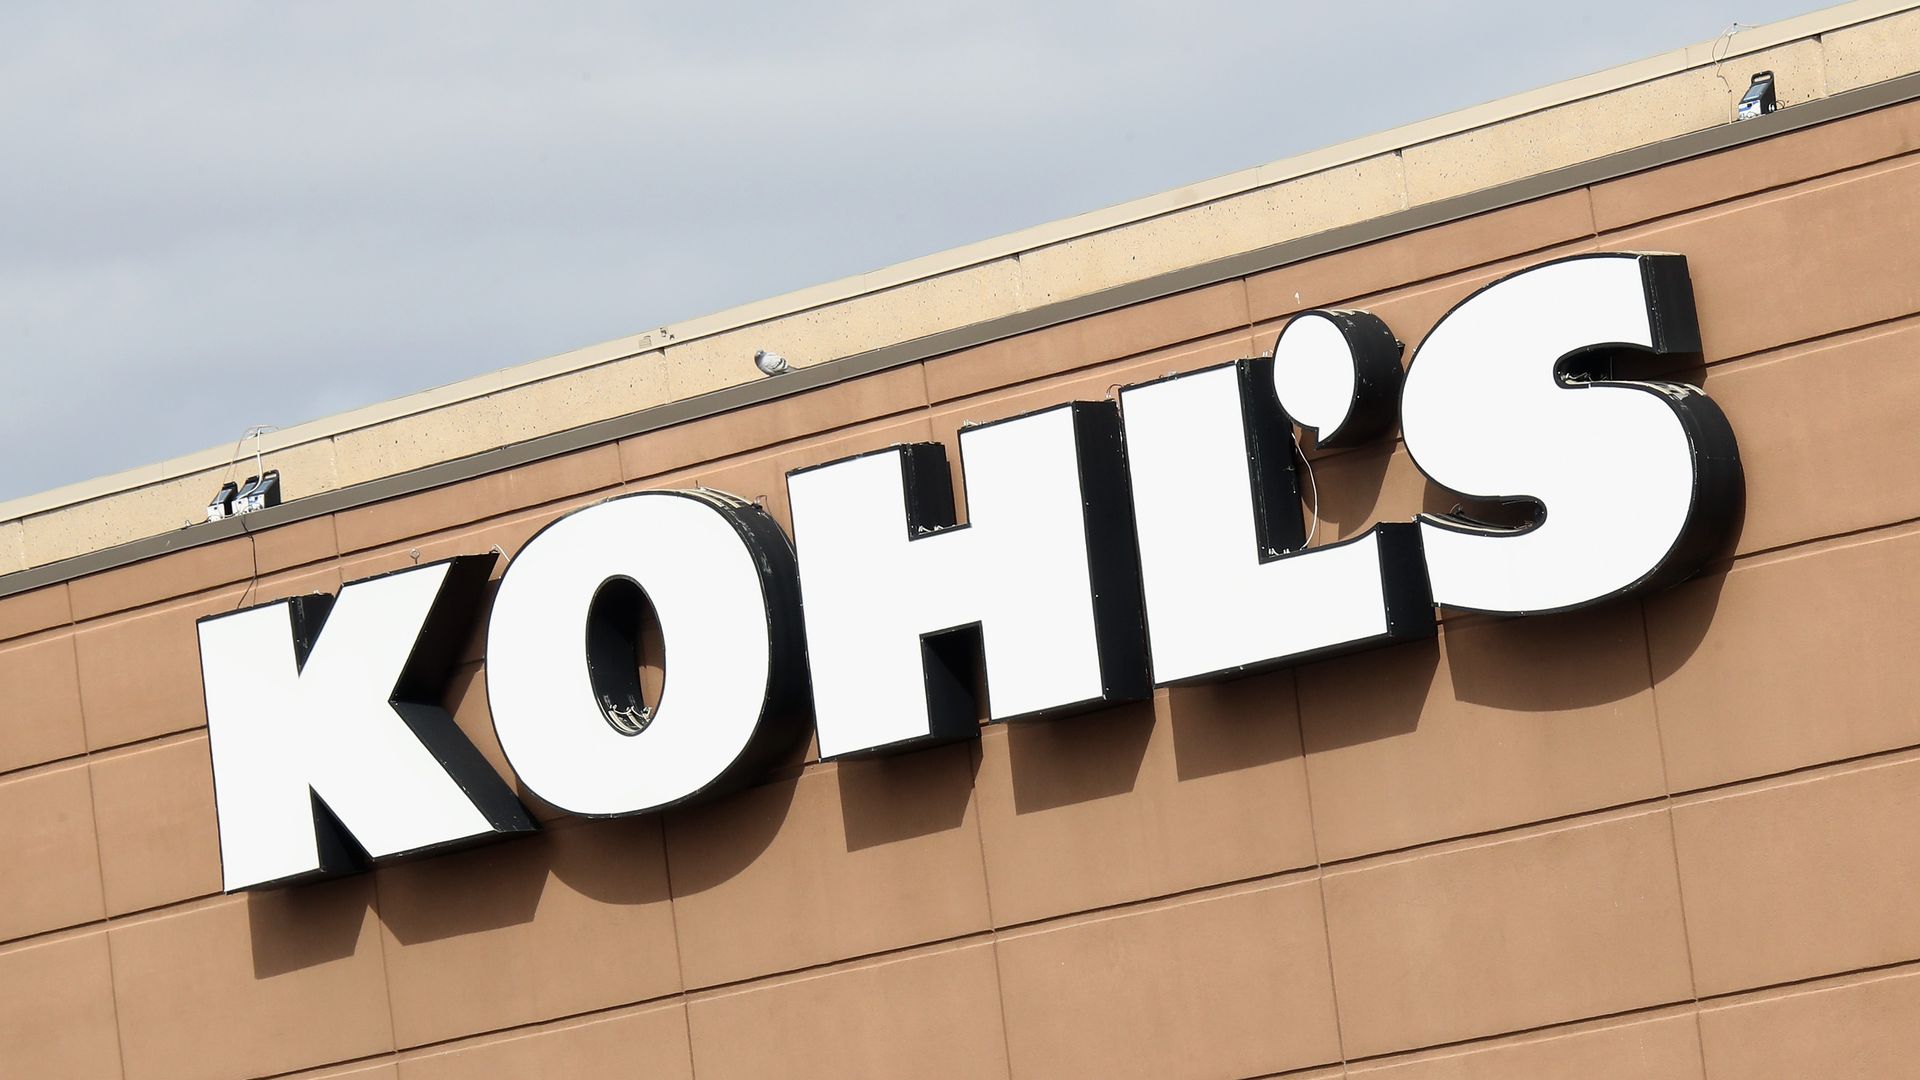 Signage spelling out the Kohl's name in white lettering appears on the side of a tan-colored building.